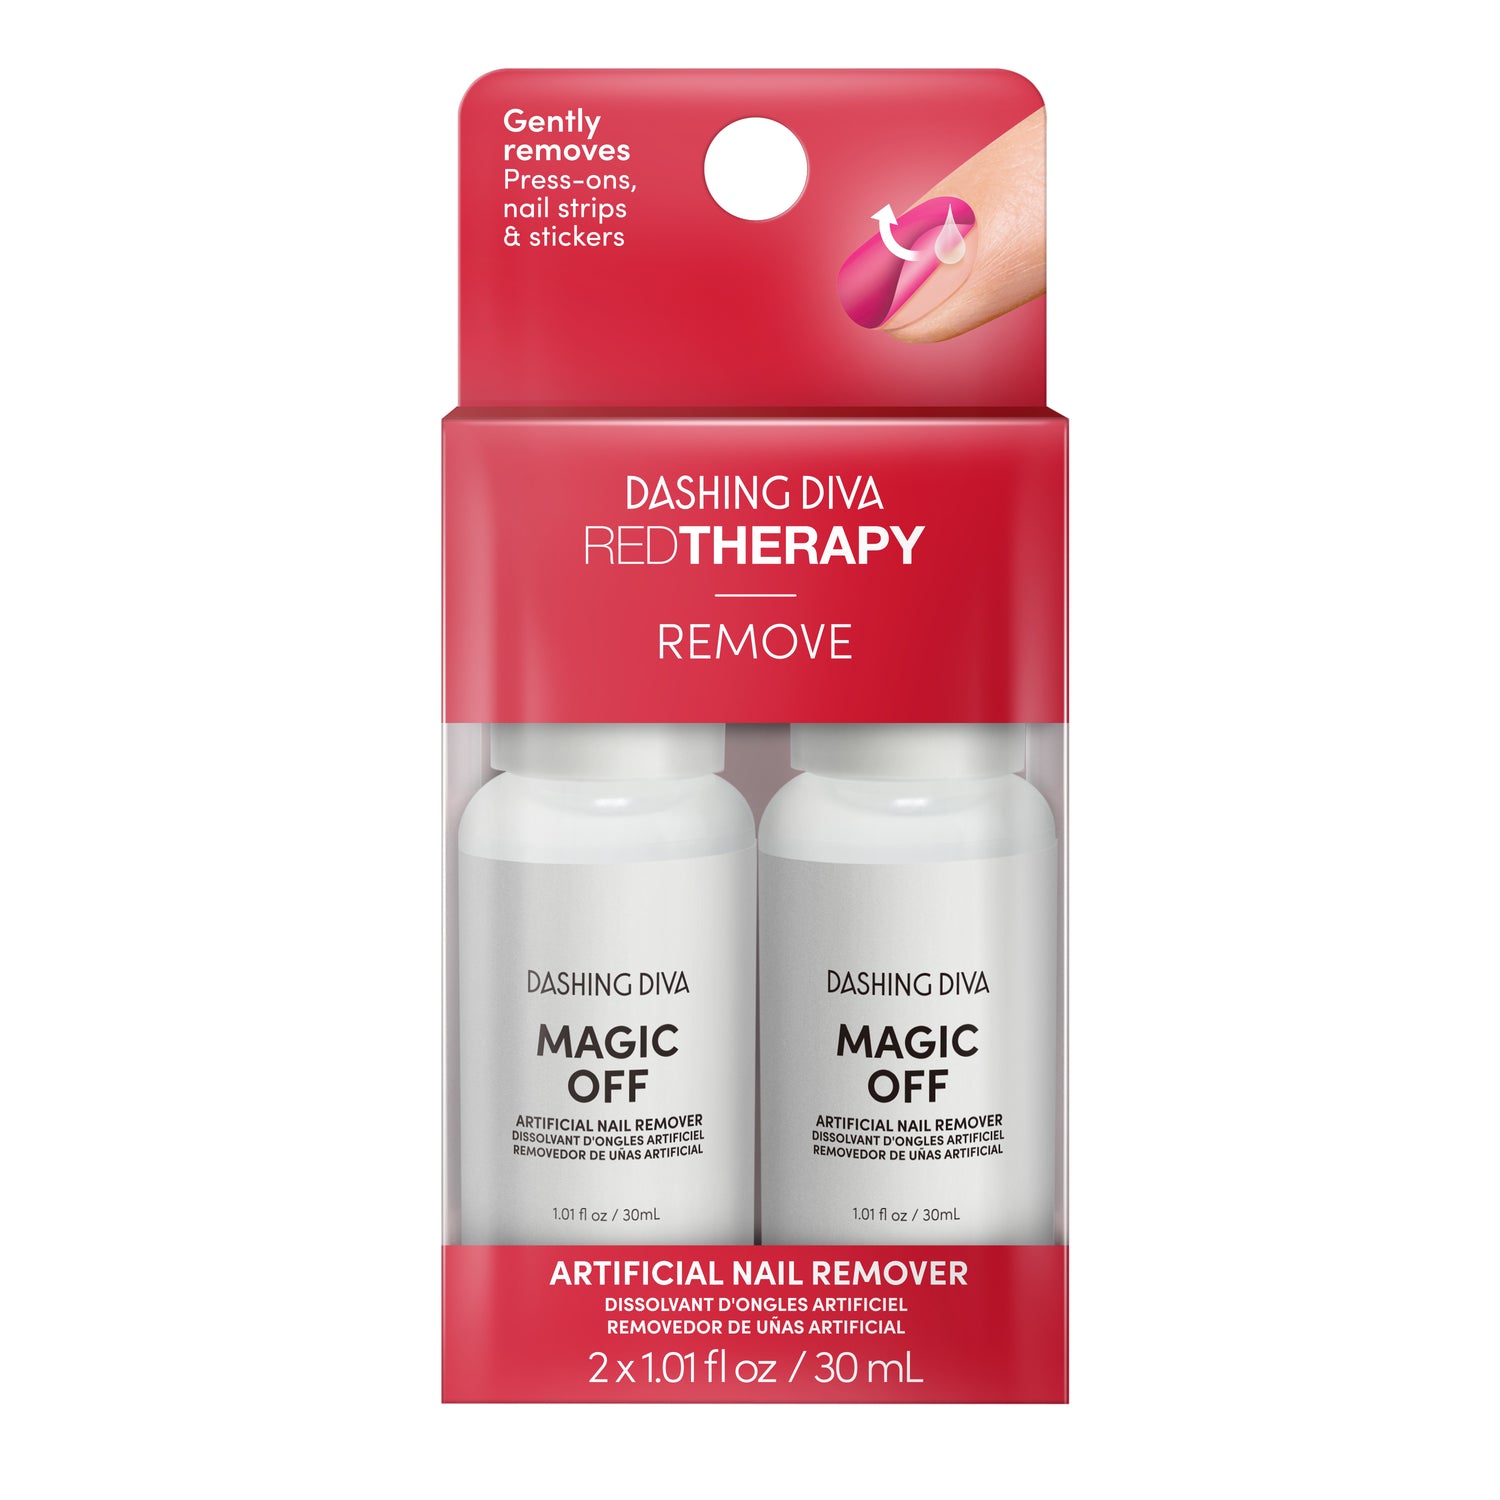 Dashing Diva Red Therapy Magic Off artificial nail remover.